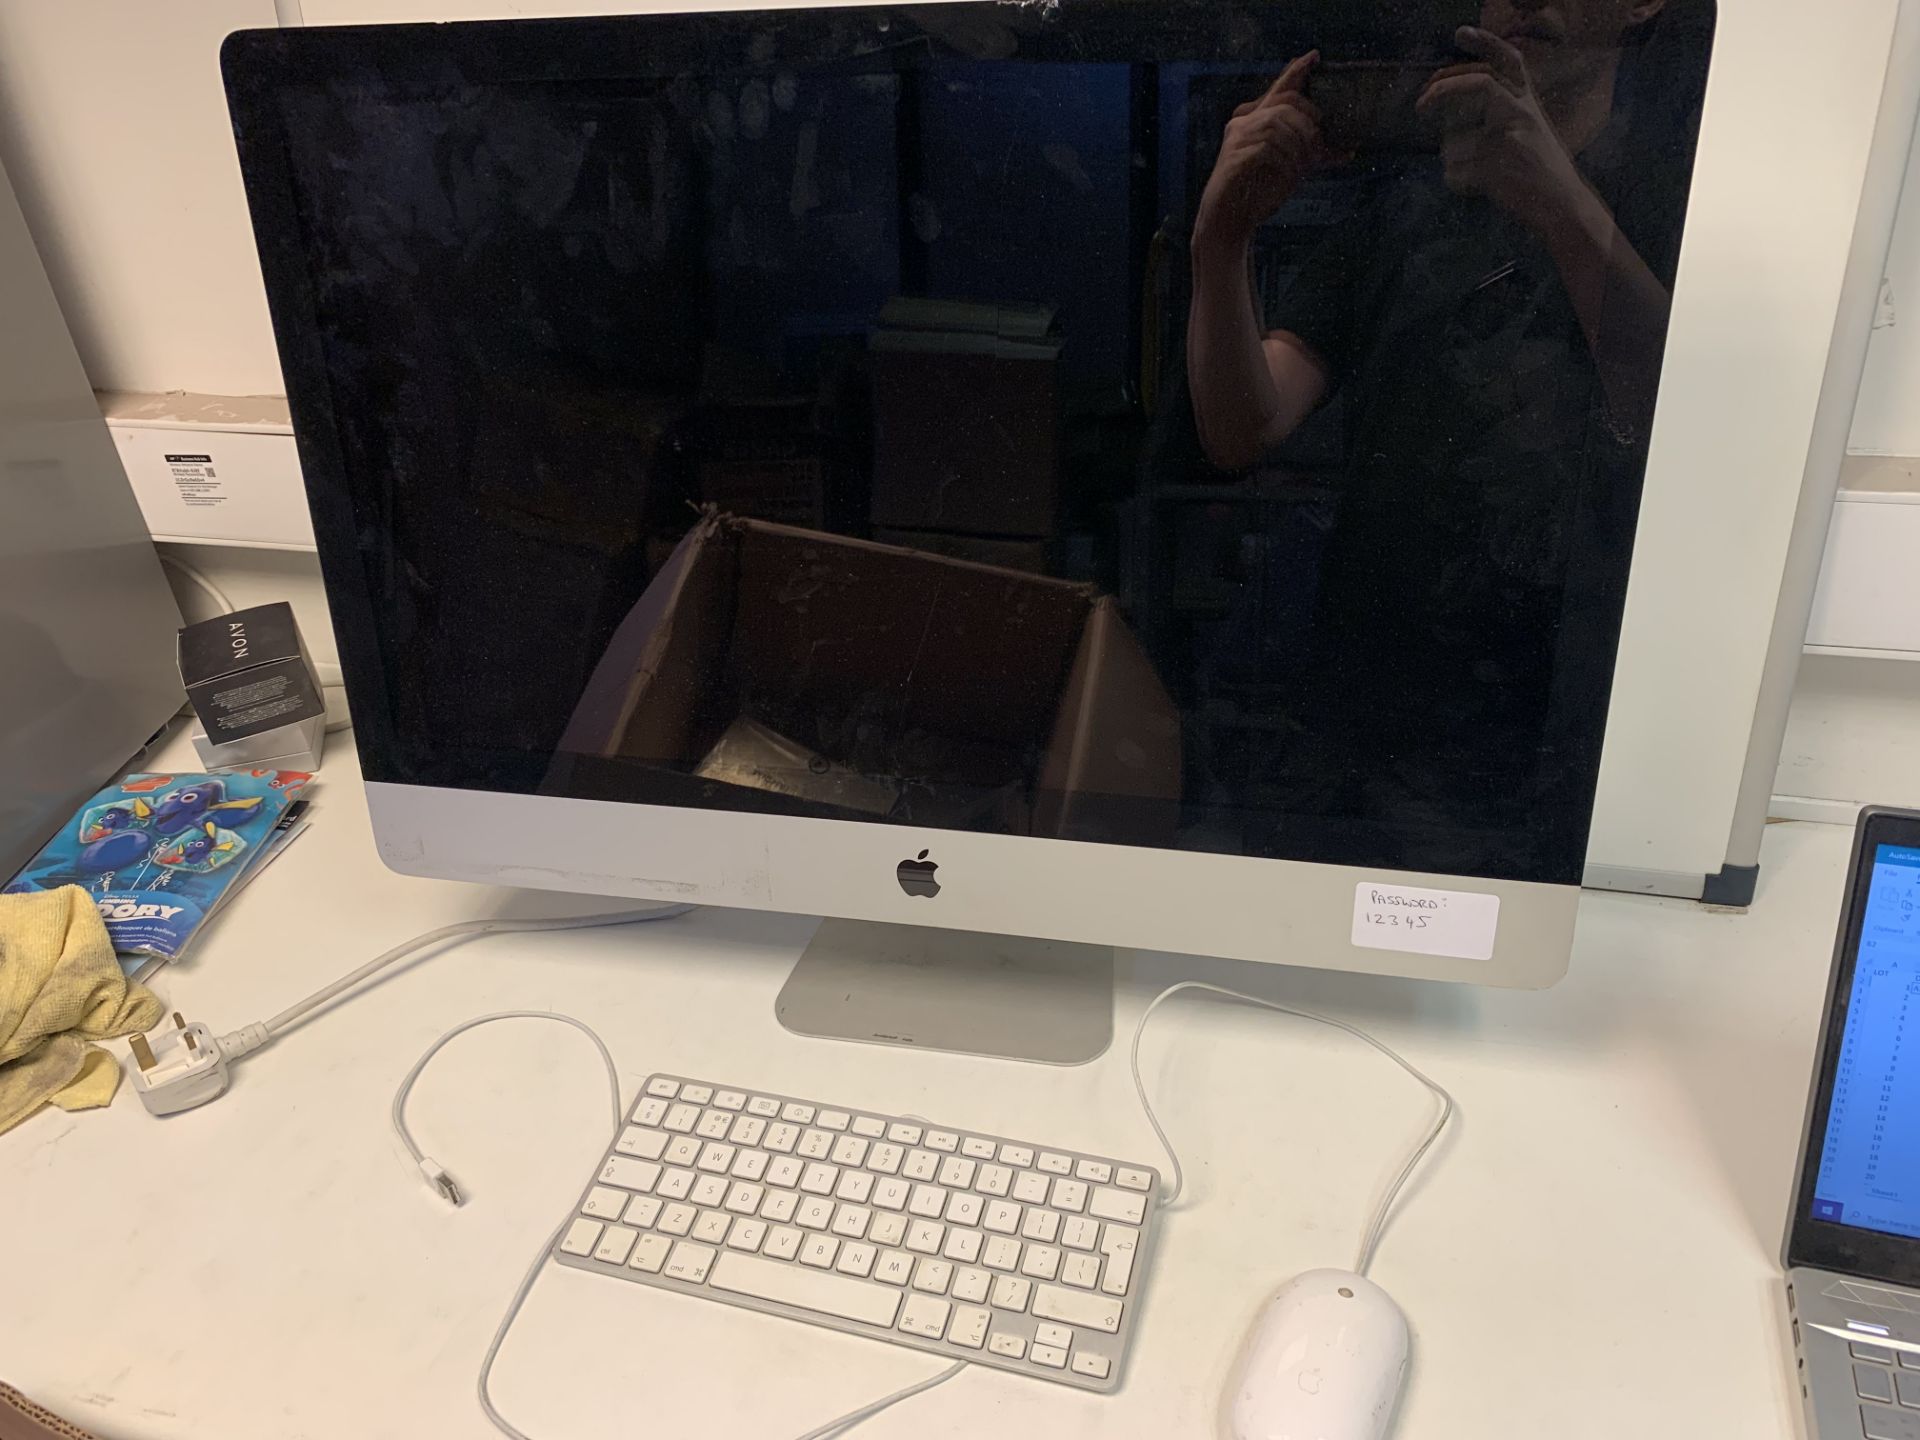 APPLE IMAC ALL IN ONE PC, INTEL CORE i3, 3.2GHZ, 27 INCH SCREEN, HIGH SIERRA OPERATING SYSTEM,